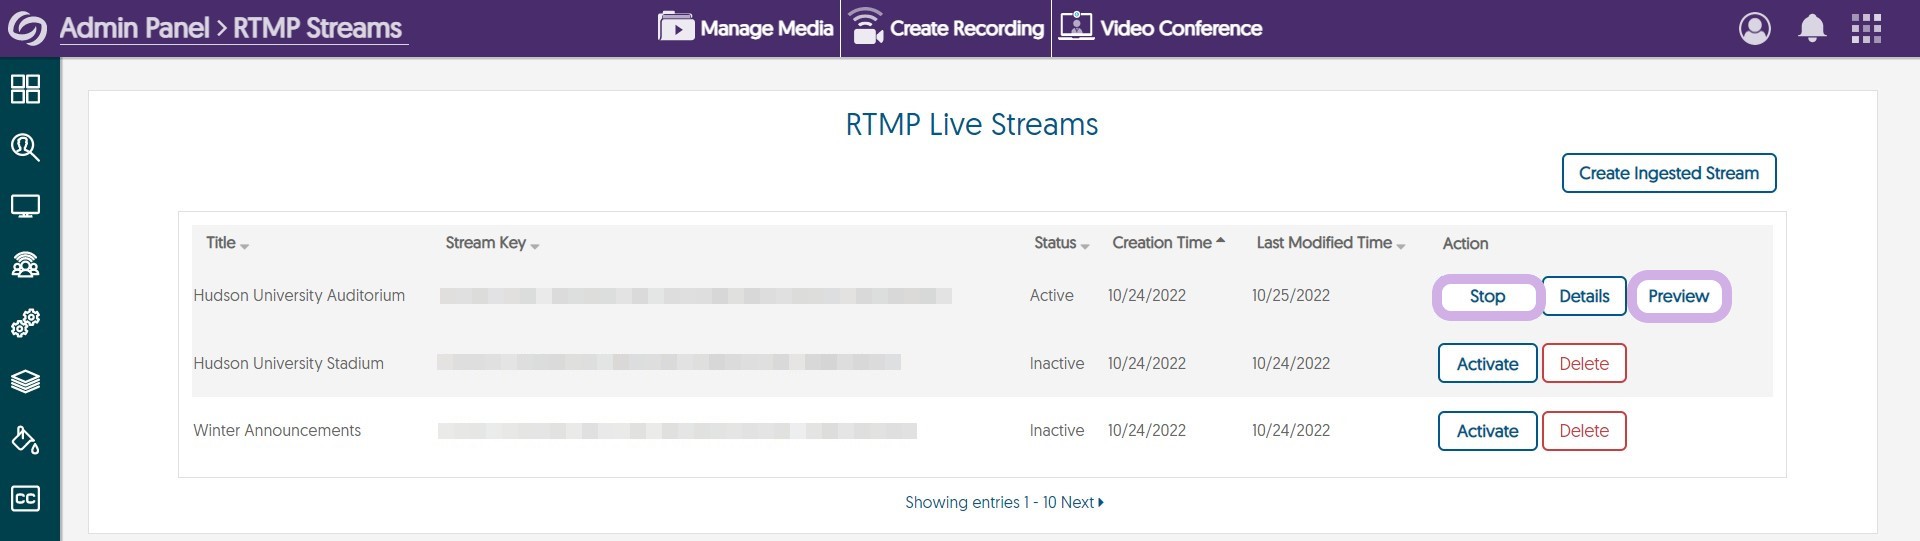 RTMP Live Stream page highlighting Stop and Preview buttons 